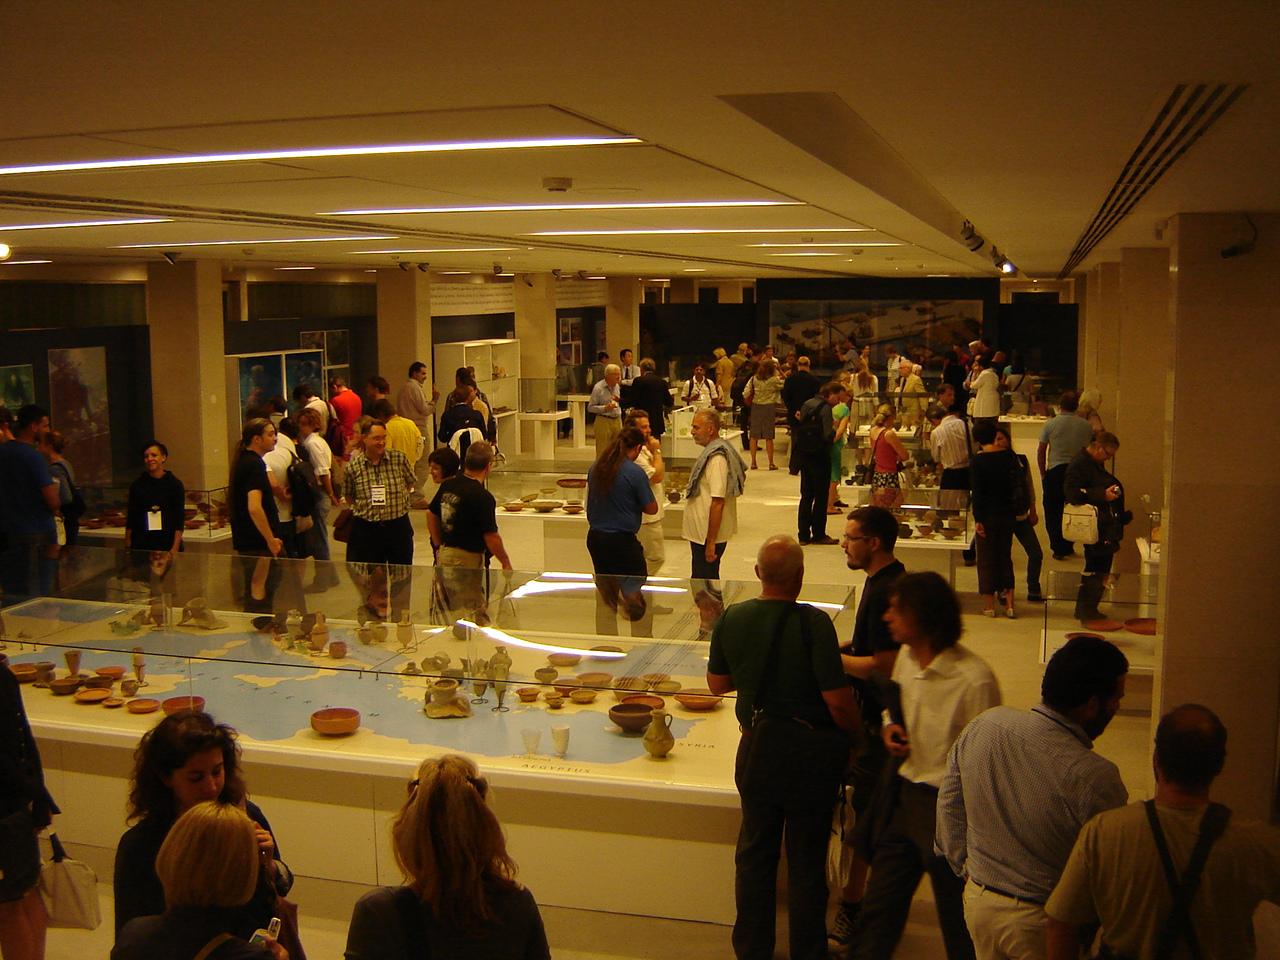  The Archaeological Museum in Zadar